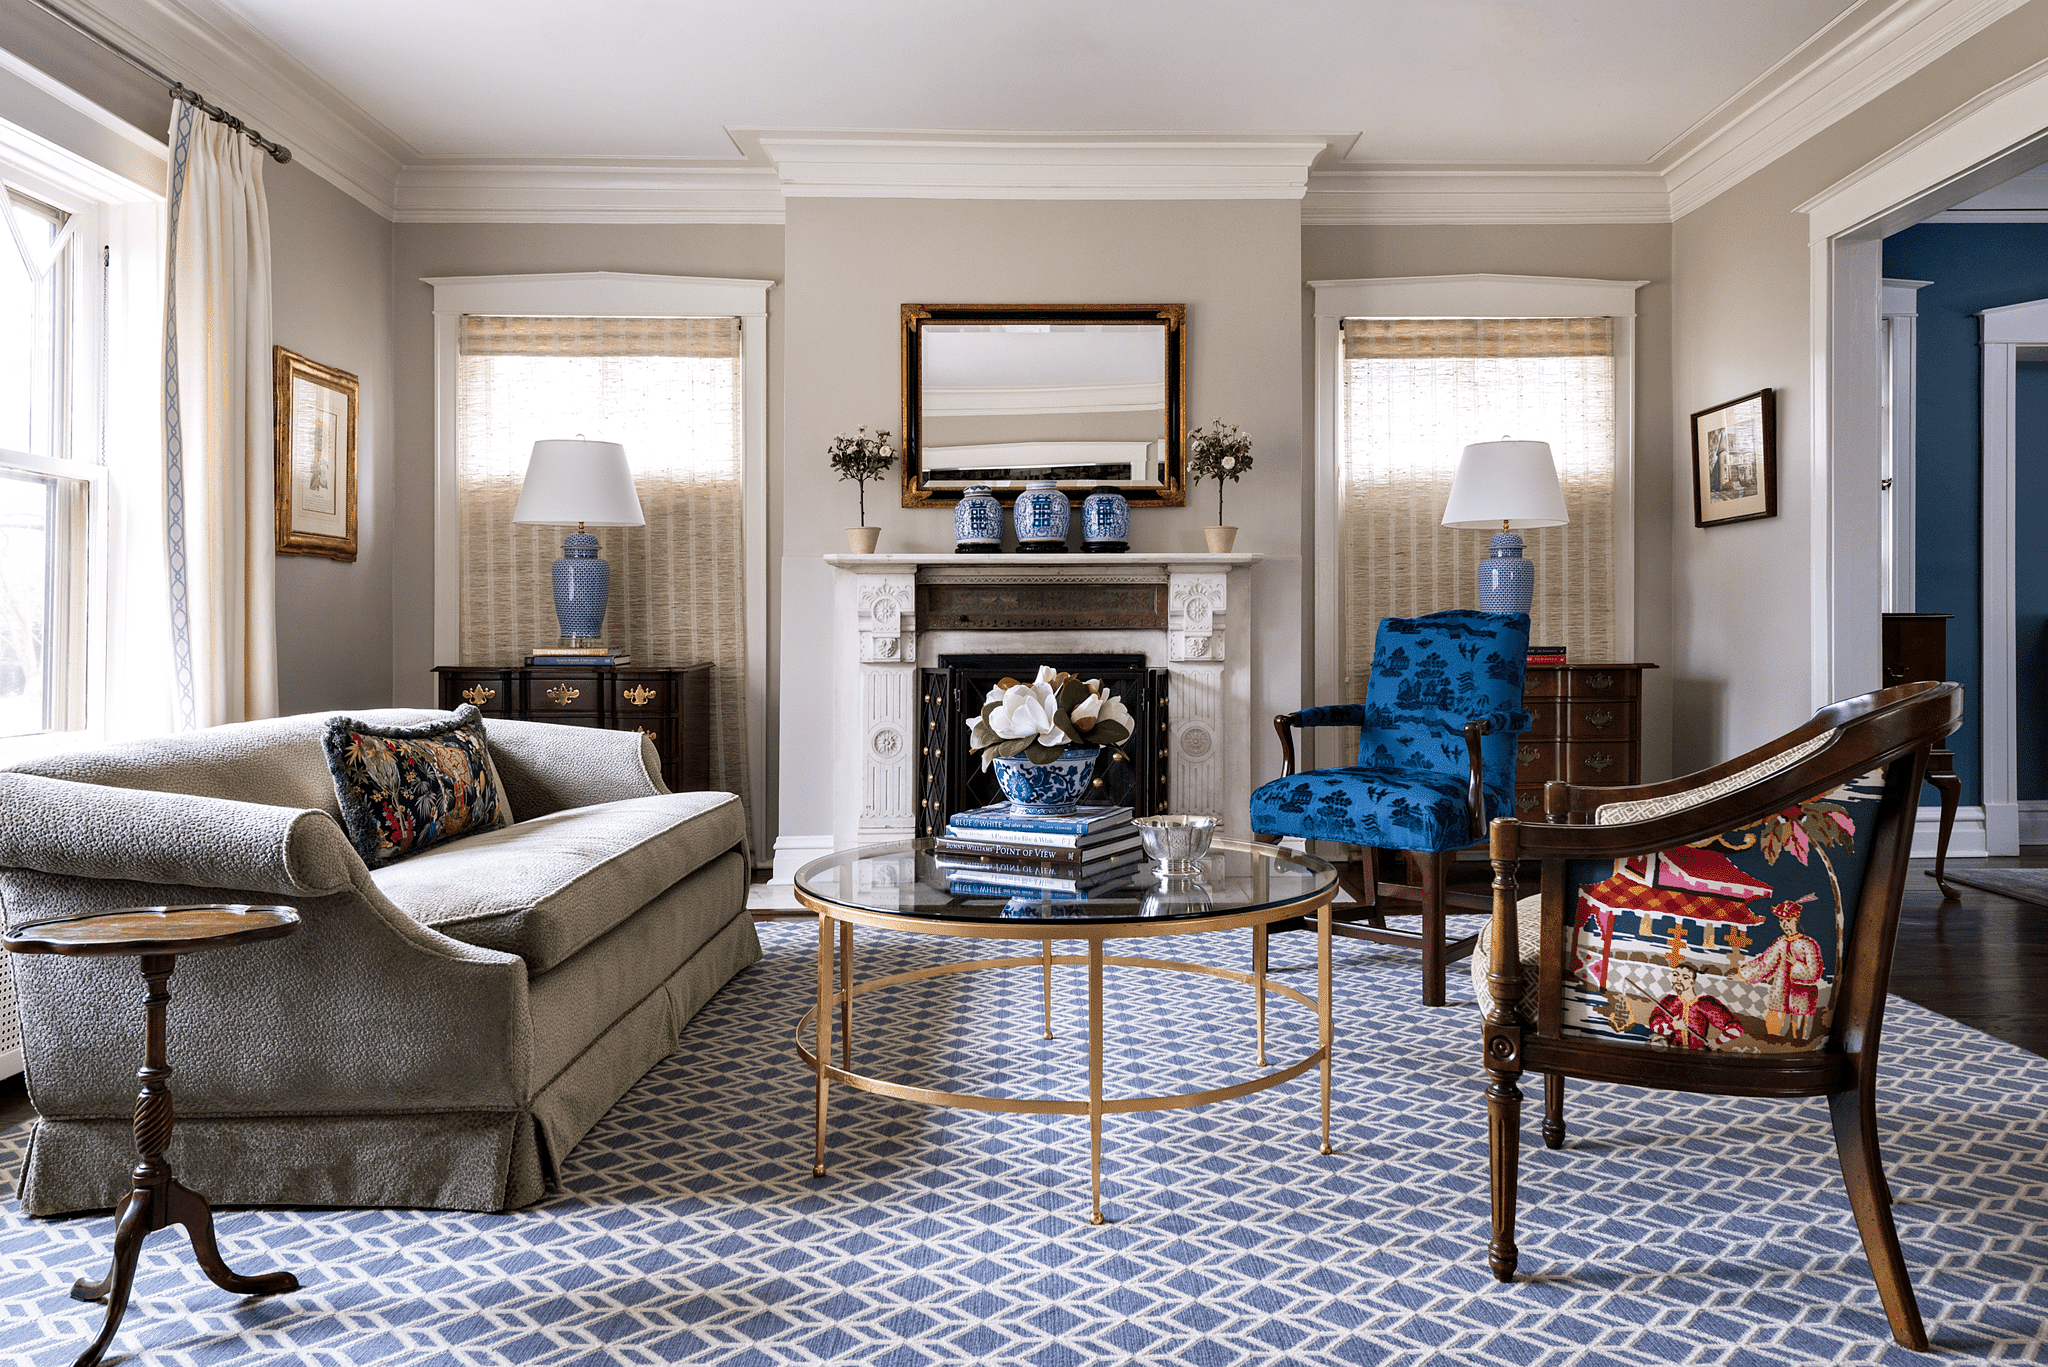 Decorate With Blue and White Buffalo Plaid  French country dining room,  French country dining room decor, French country kitchens